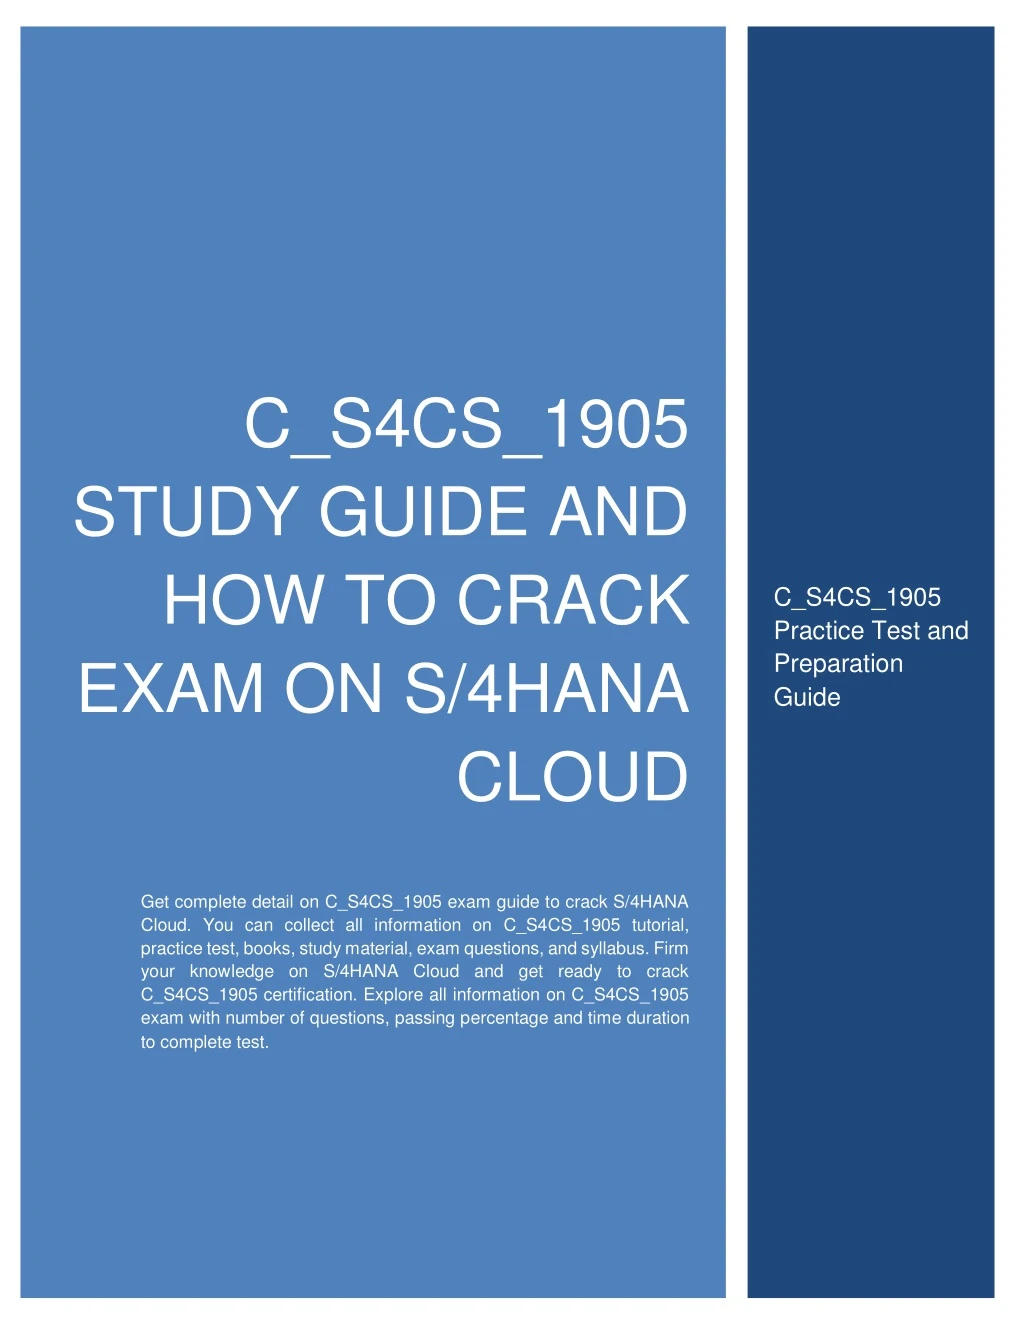 c s4cs 1905 study guide and how to crack exam